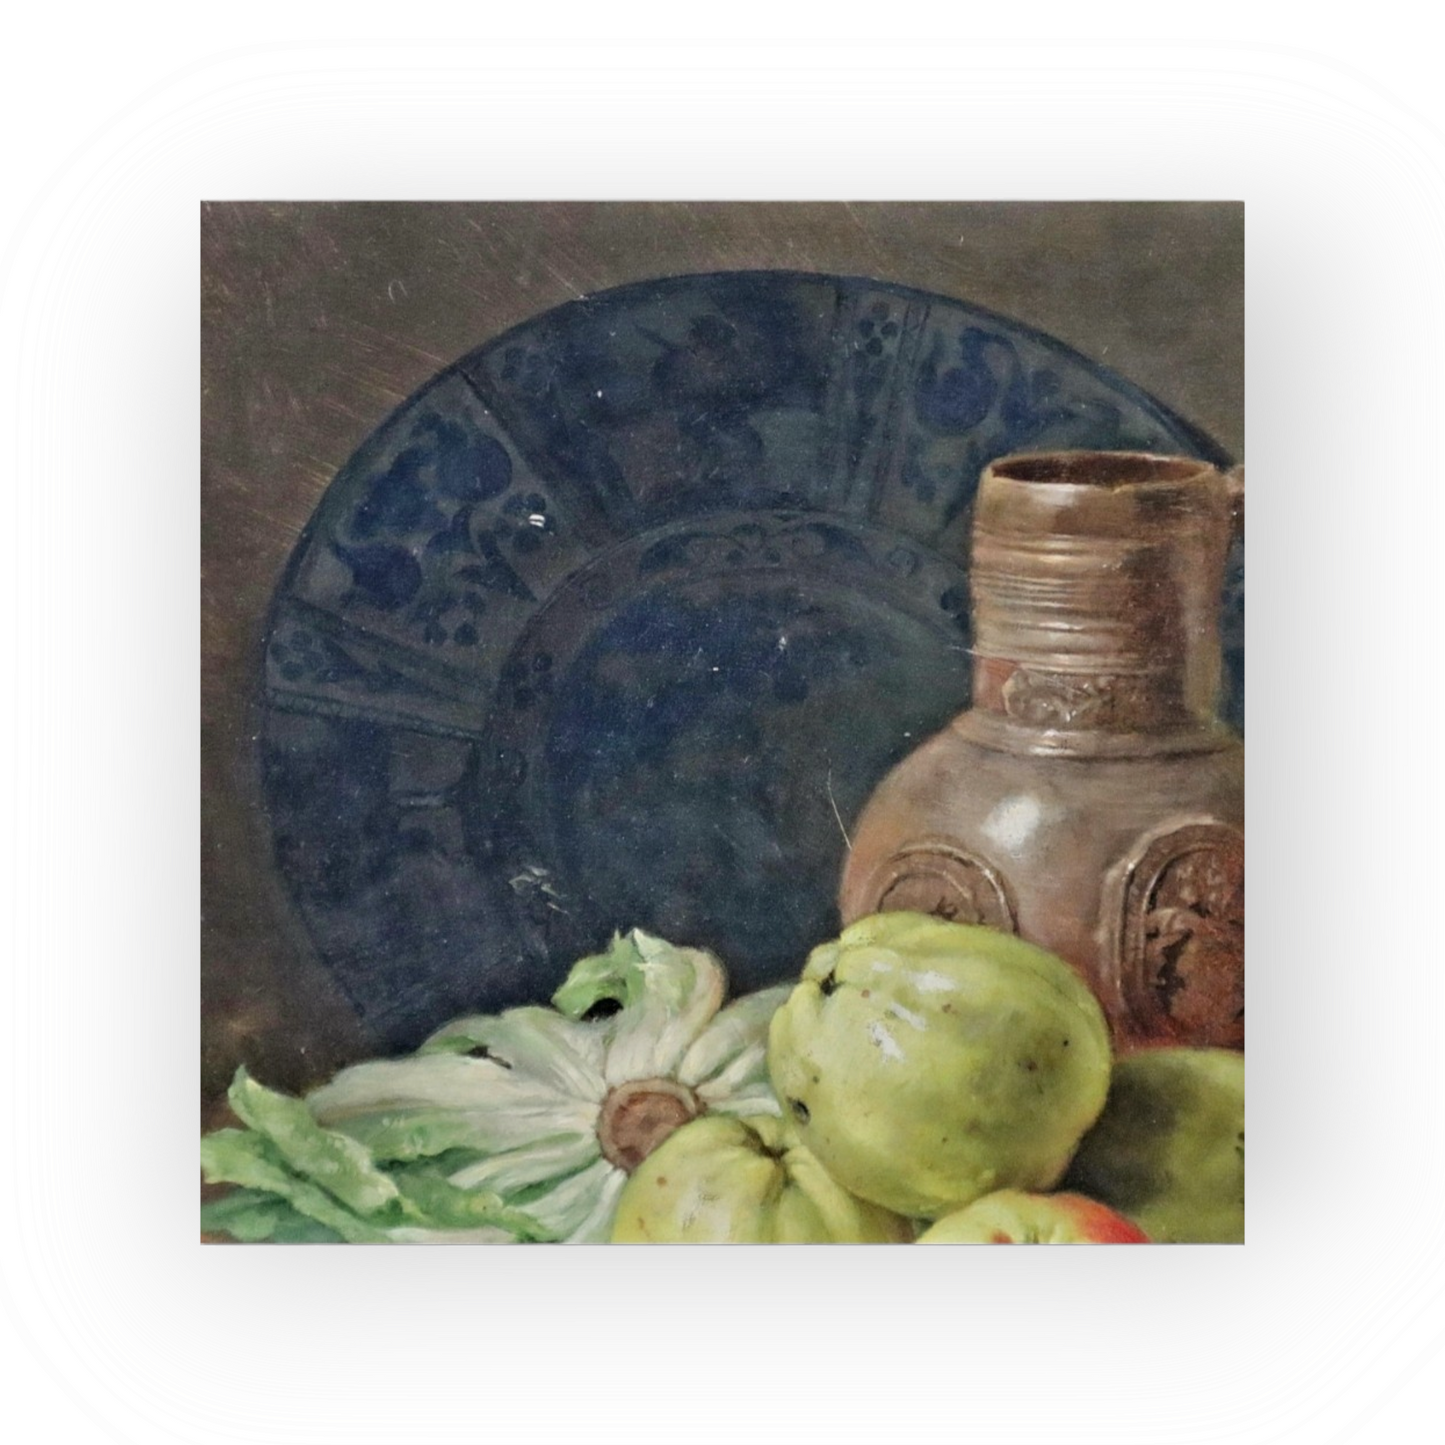 19th Century Flemish School Antique Still Life Oil Painting With Fruit, Vegetables, 16thC Raeren Stoneware Jug and Delftware Plate